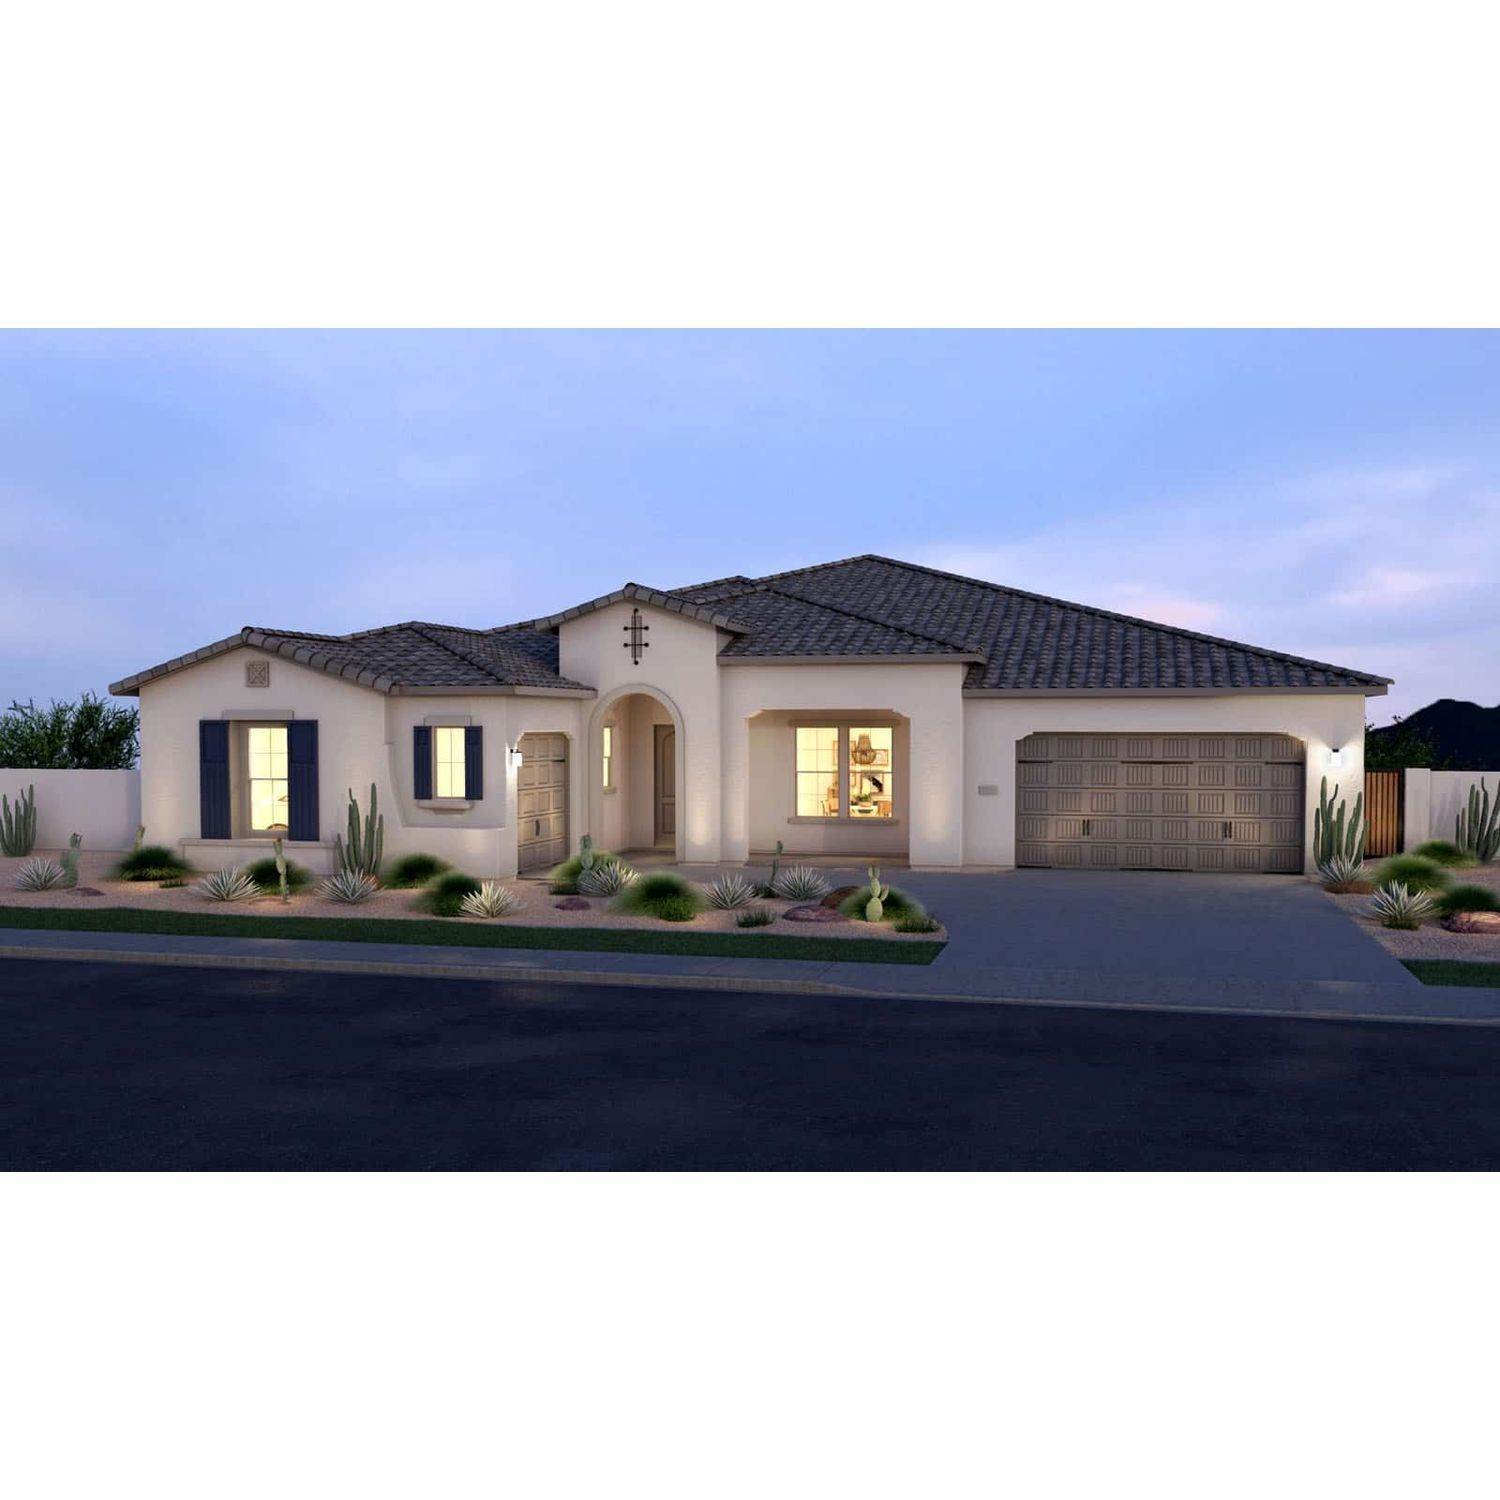 Single Family for Sale at Preserve At Sedella 18102 W Highland Ave., Goodyear, AZ 85395